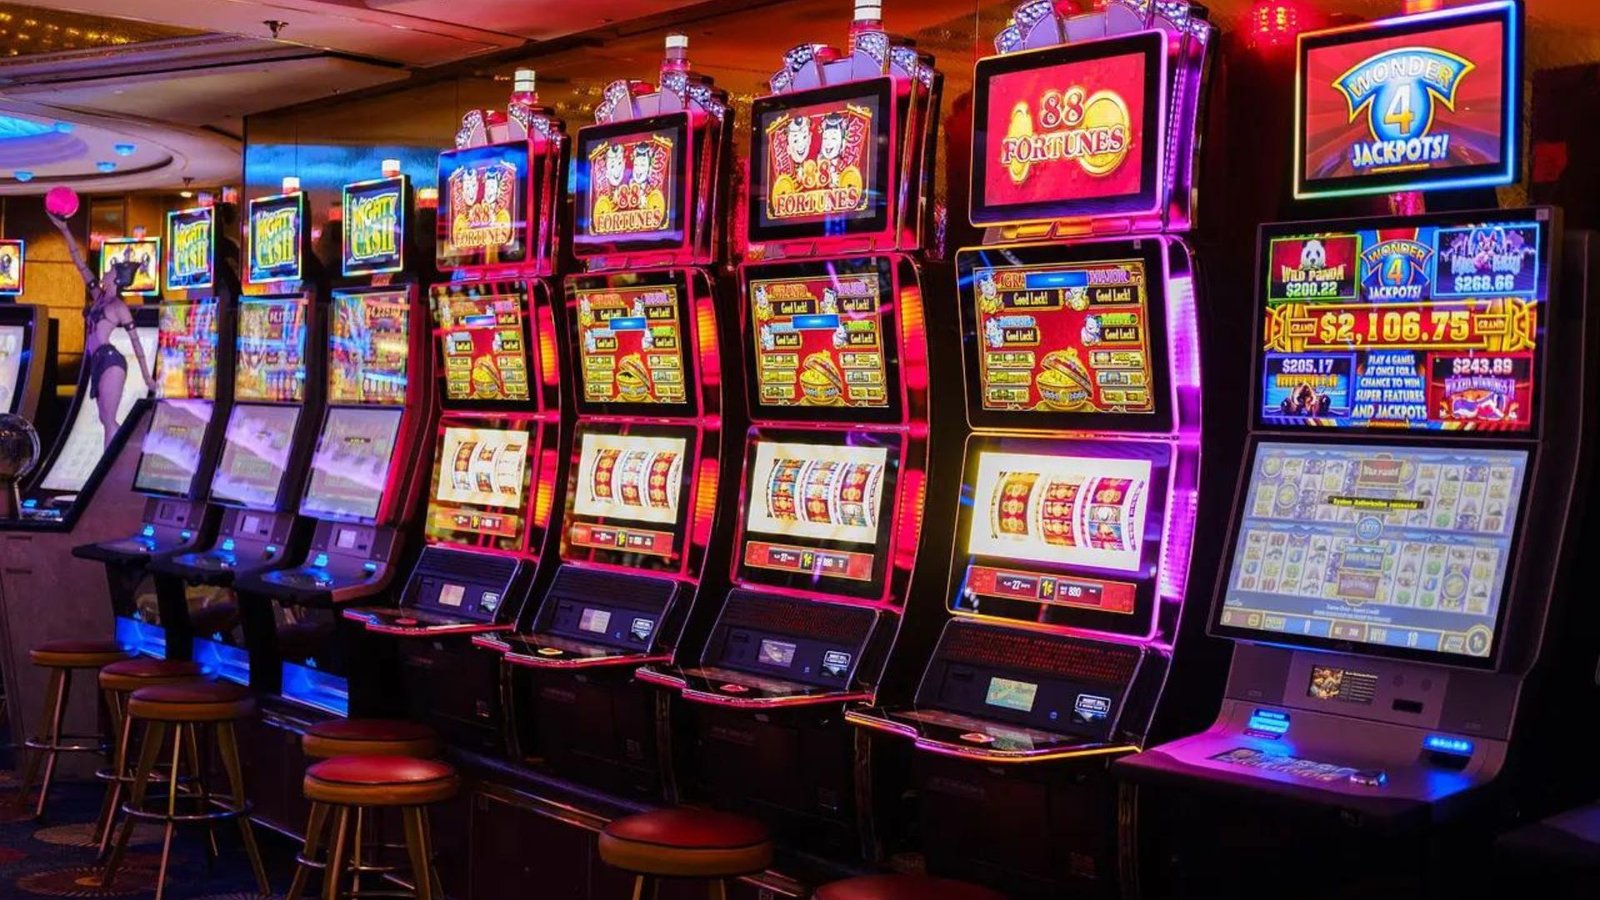  Online Slot Volatility being shown on slot machines